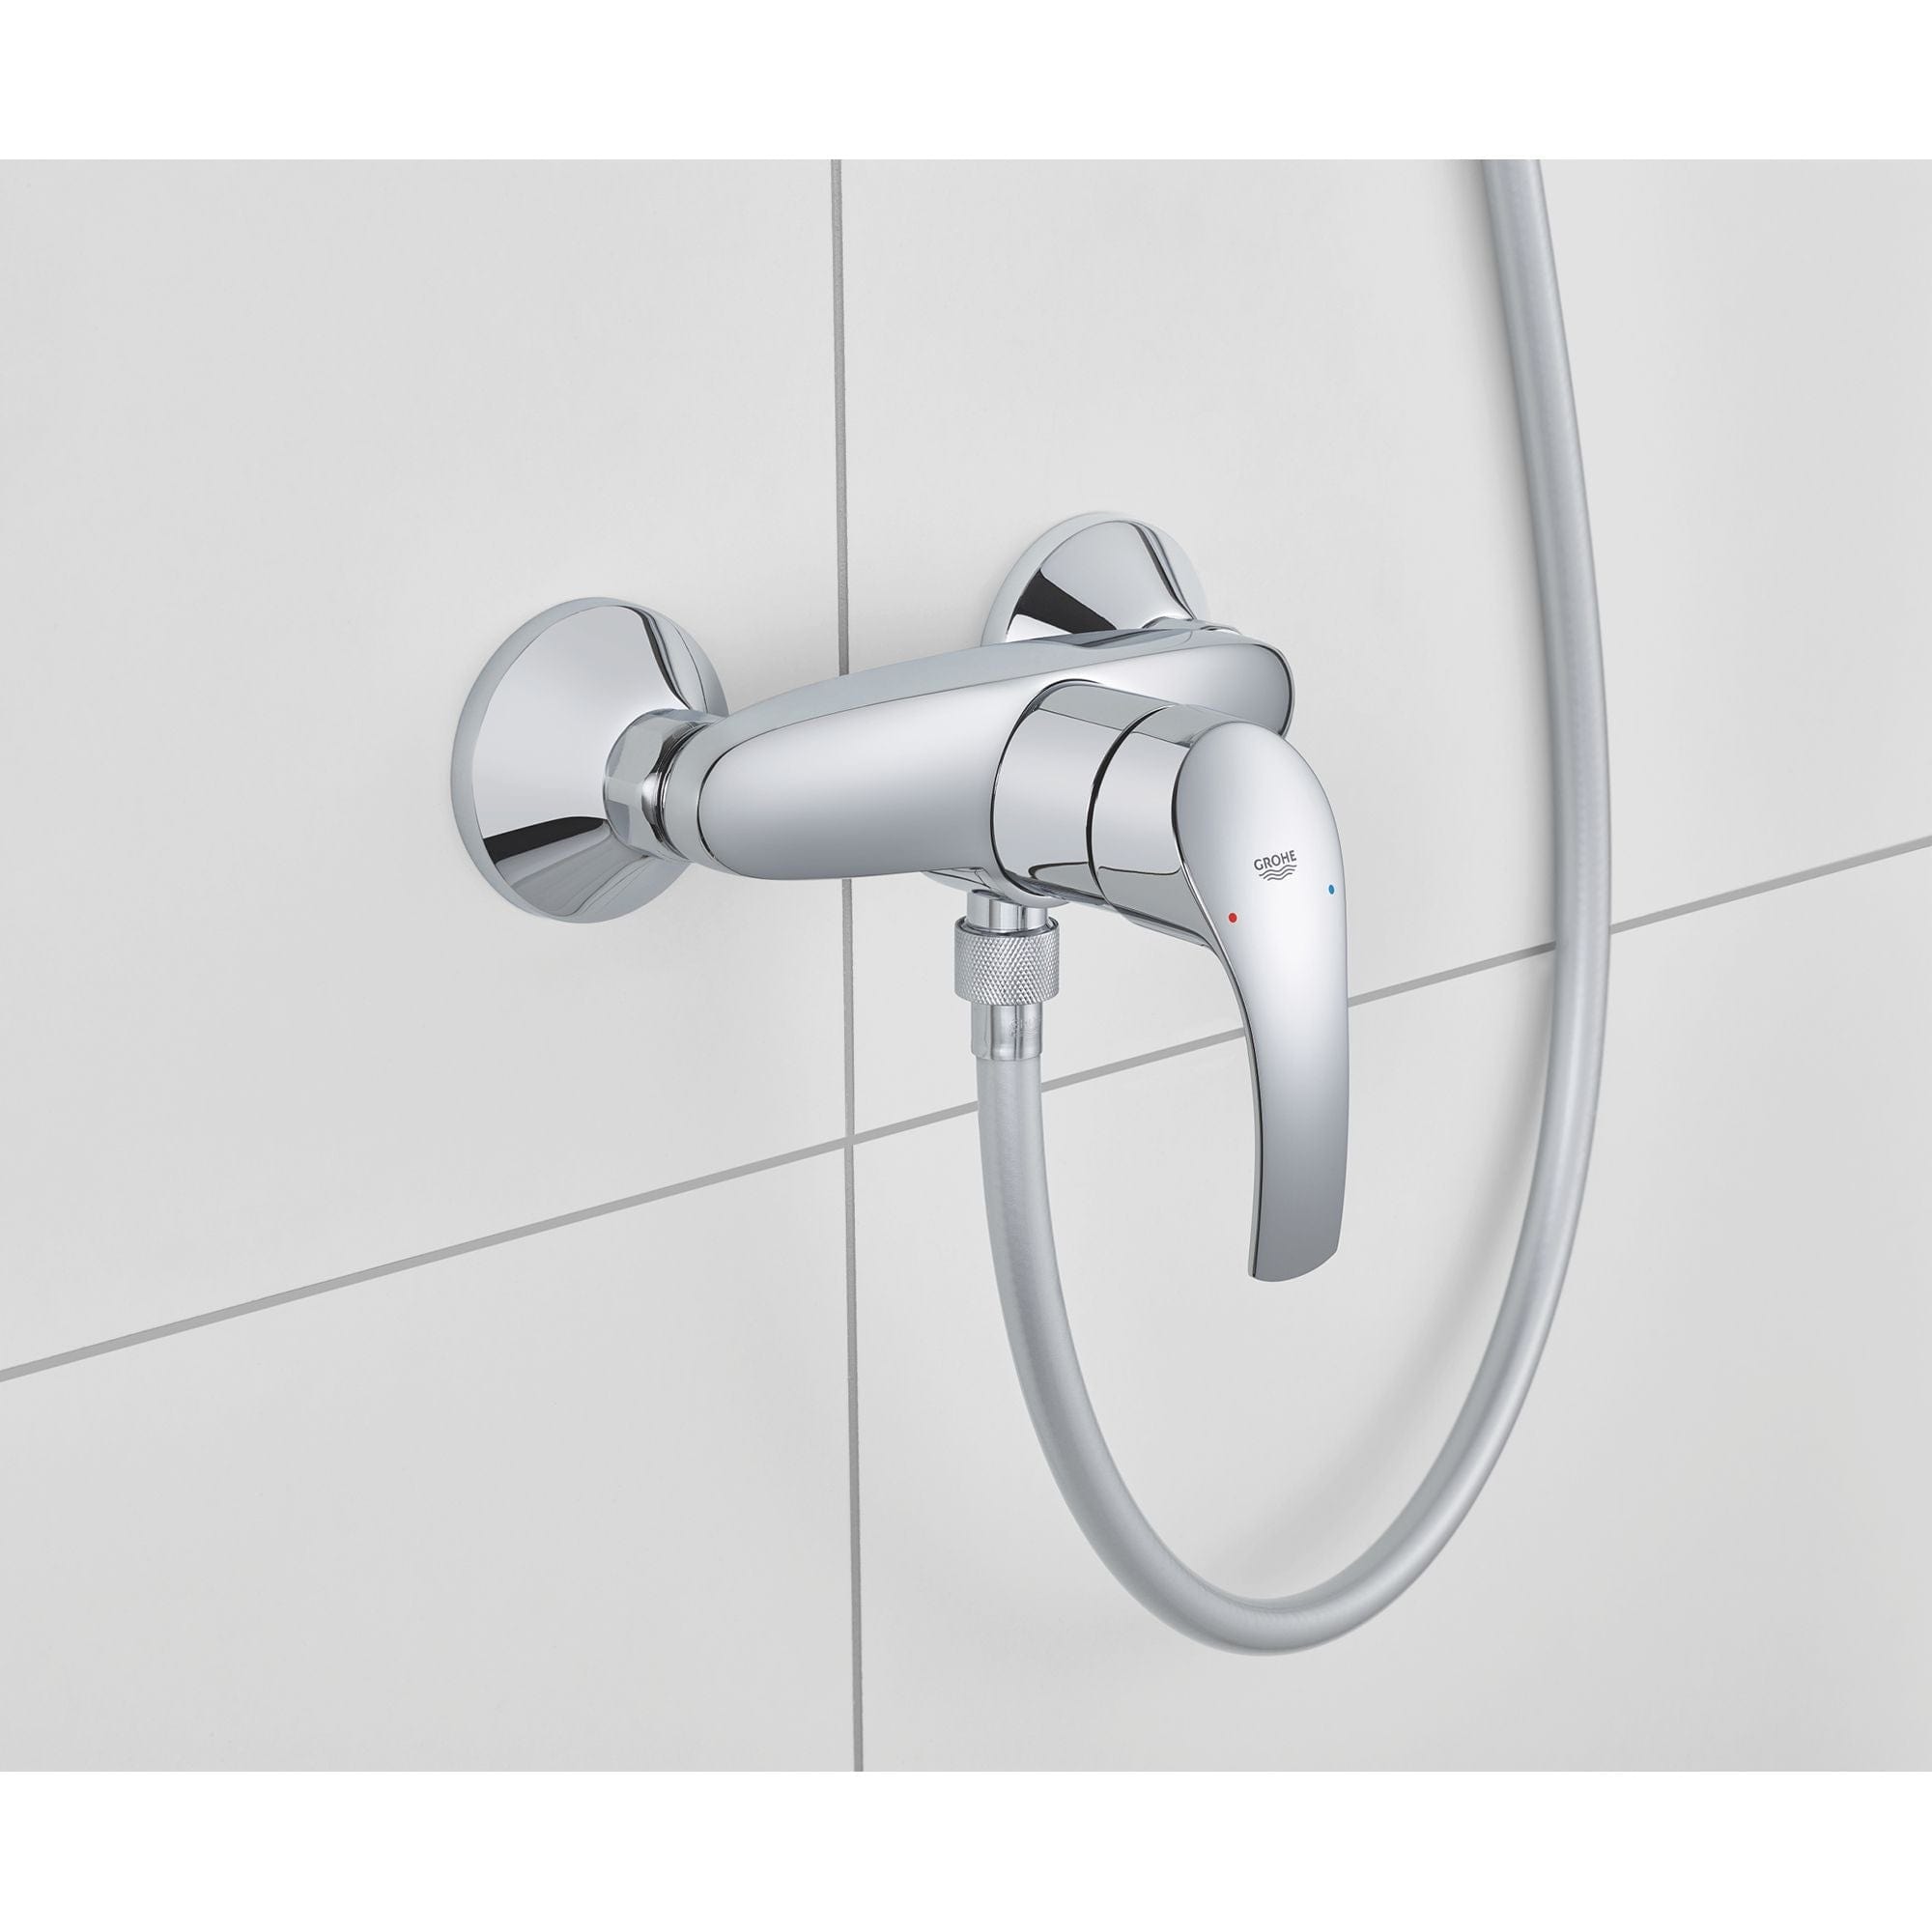 Grohe Eurosmart Single-lever shower mixer 1/2″, Chrome | Supply Master | Accra, Ghana Bathroom Faucet Buy Tools hardware Building materials